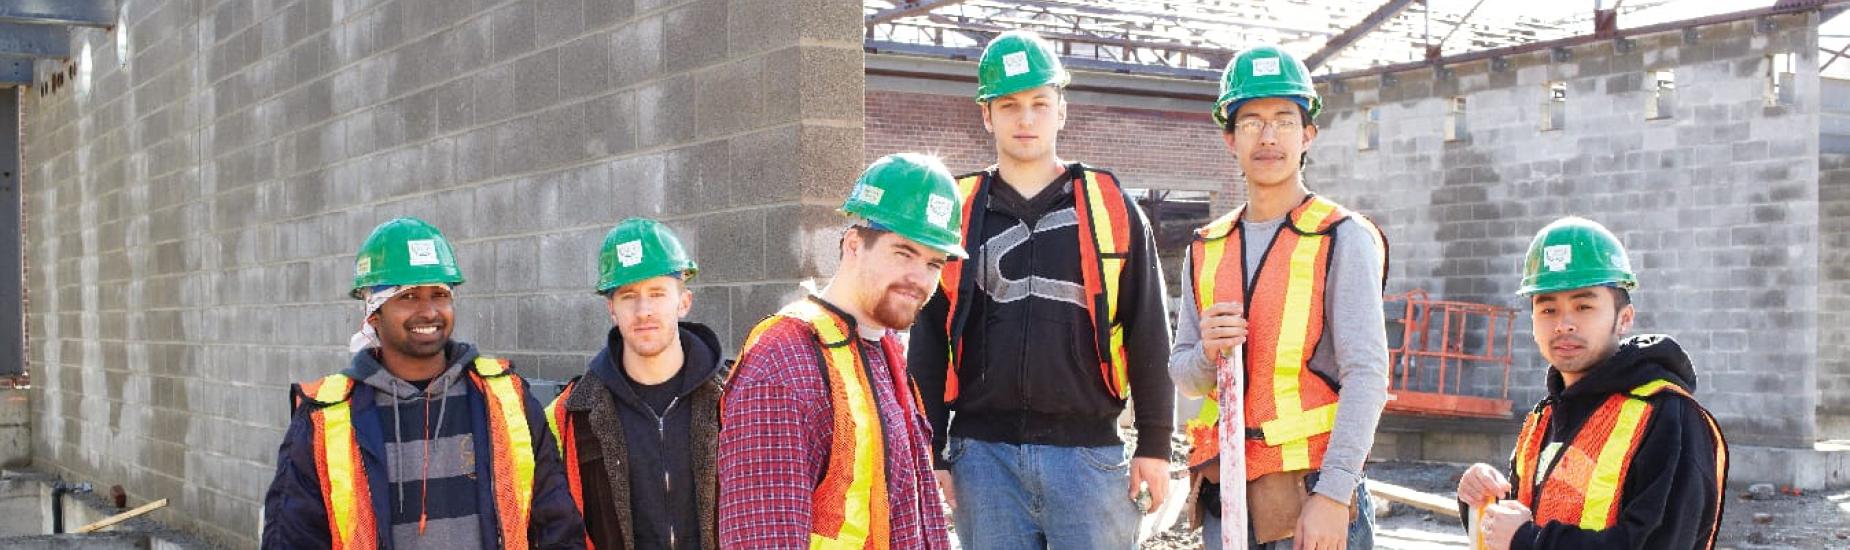 Students on the job at Evergreen Brickworks.